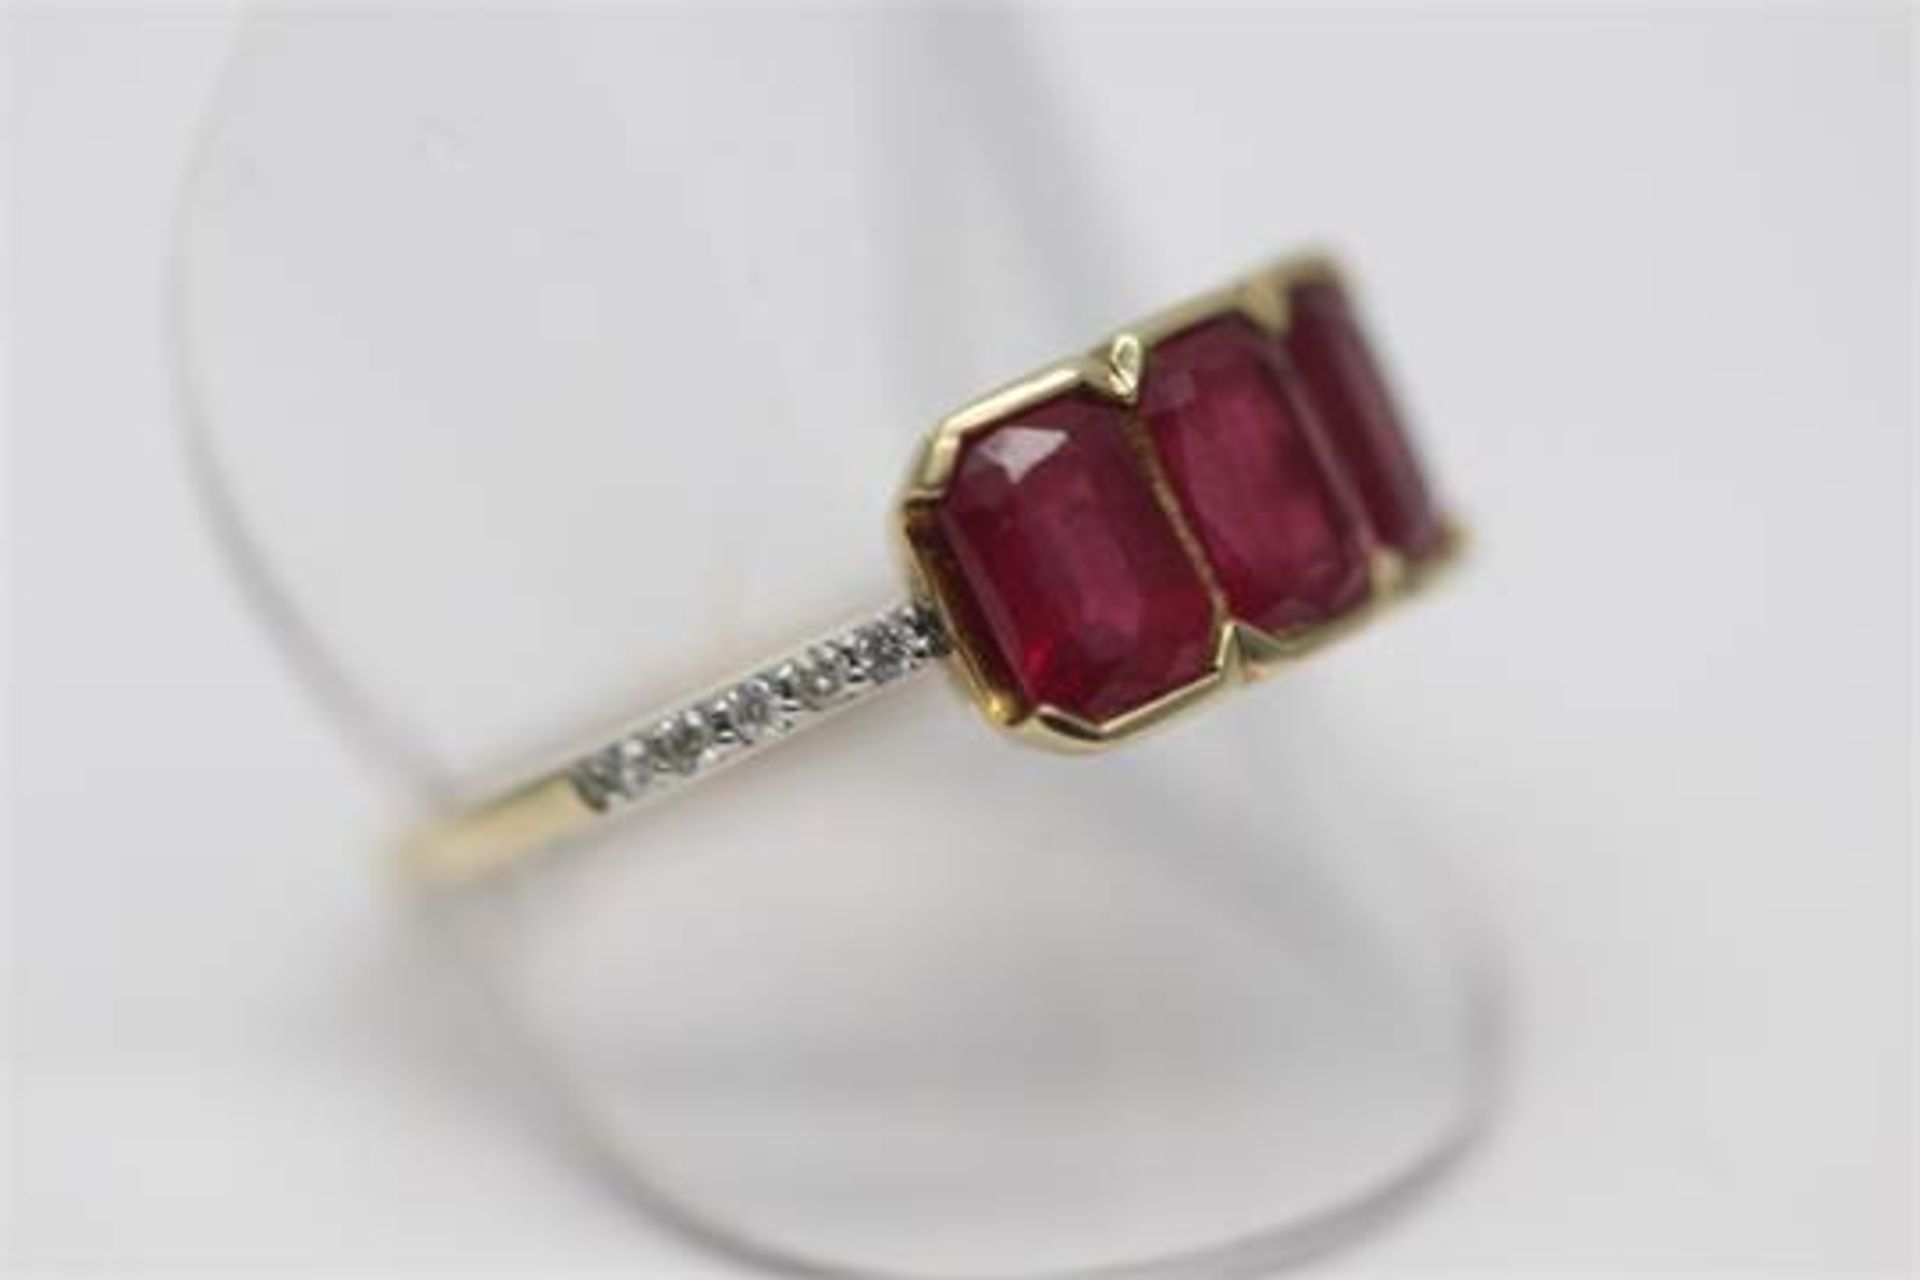 SOLID YELLOW GOLD LADIES RING SET WITH 2.40 CARATS NATURAL RUBY WITH DIAMONDS ALONG SIDE (PV-JH) - Image 2 of 3